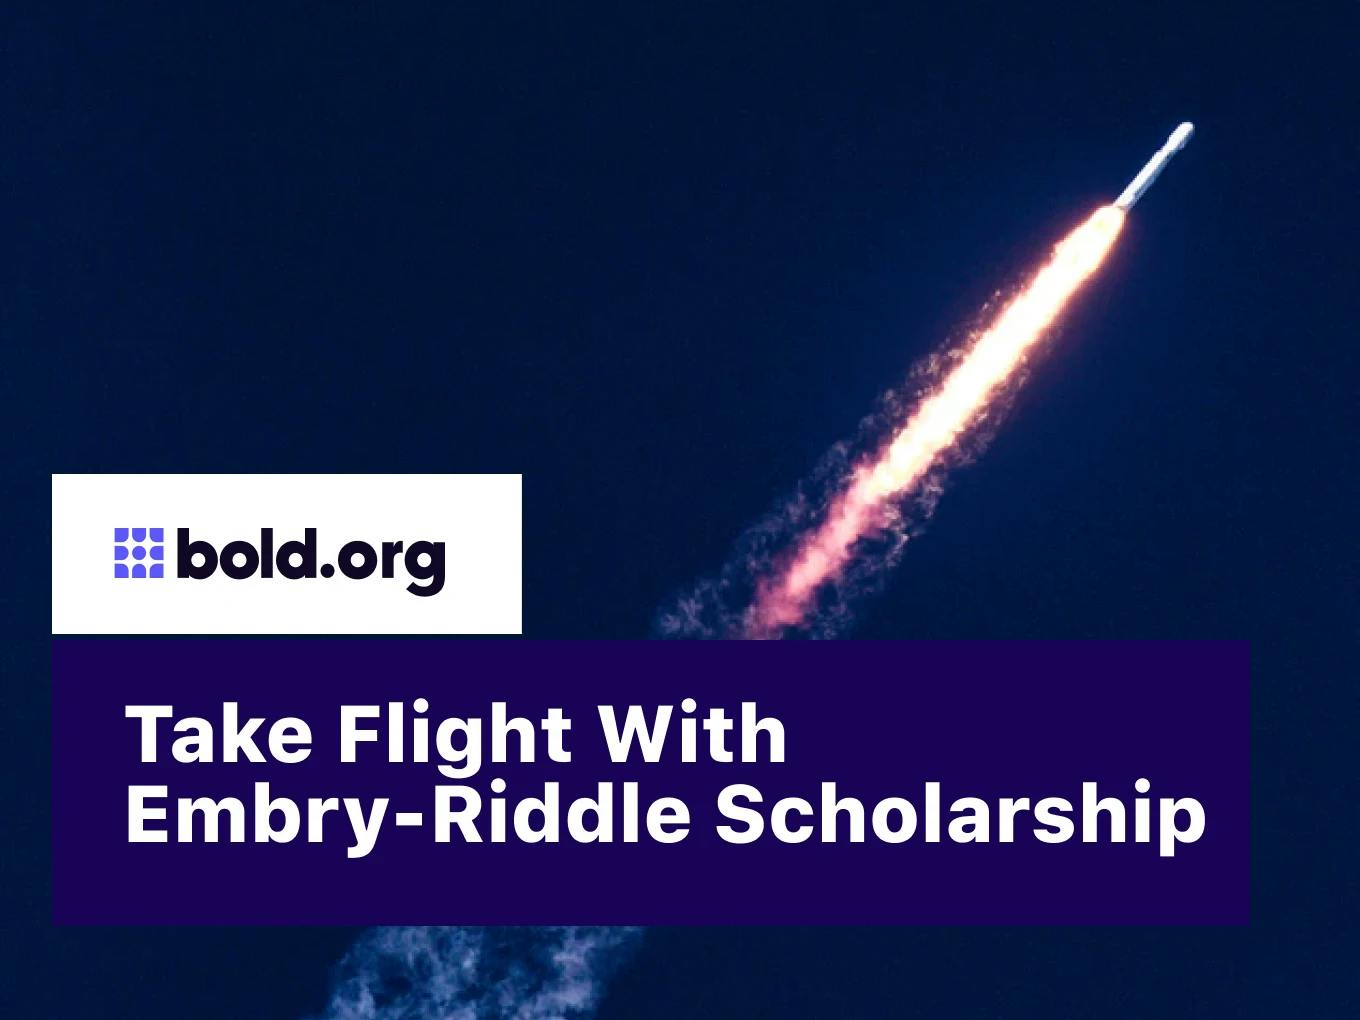 Take Flight With Embry-Riddle Scholarship